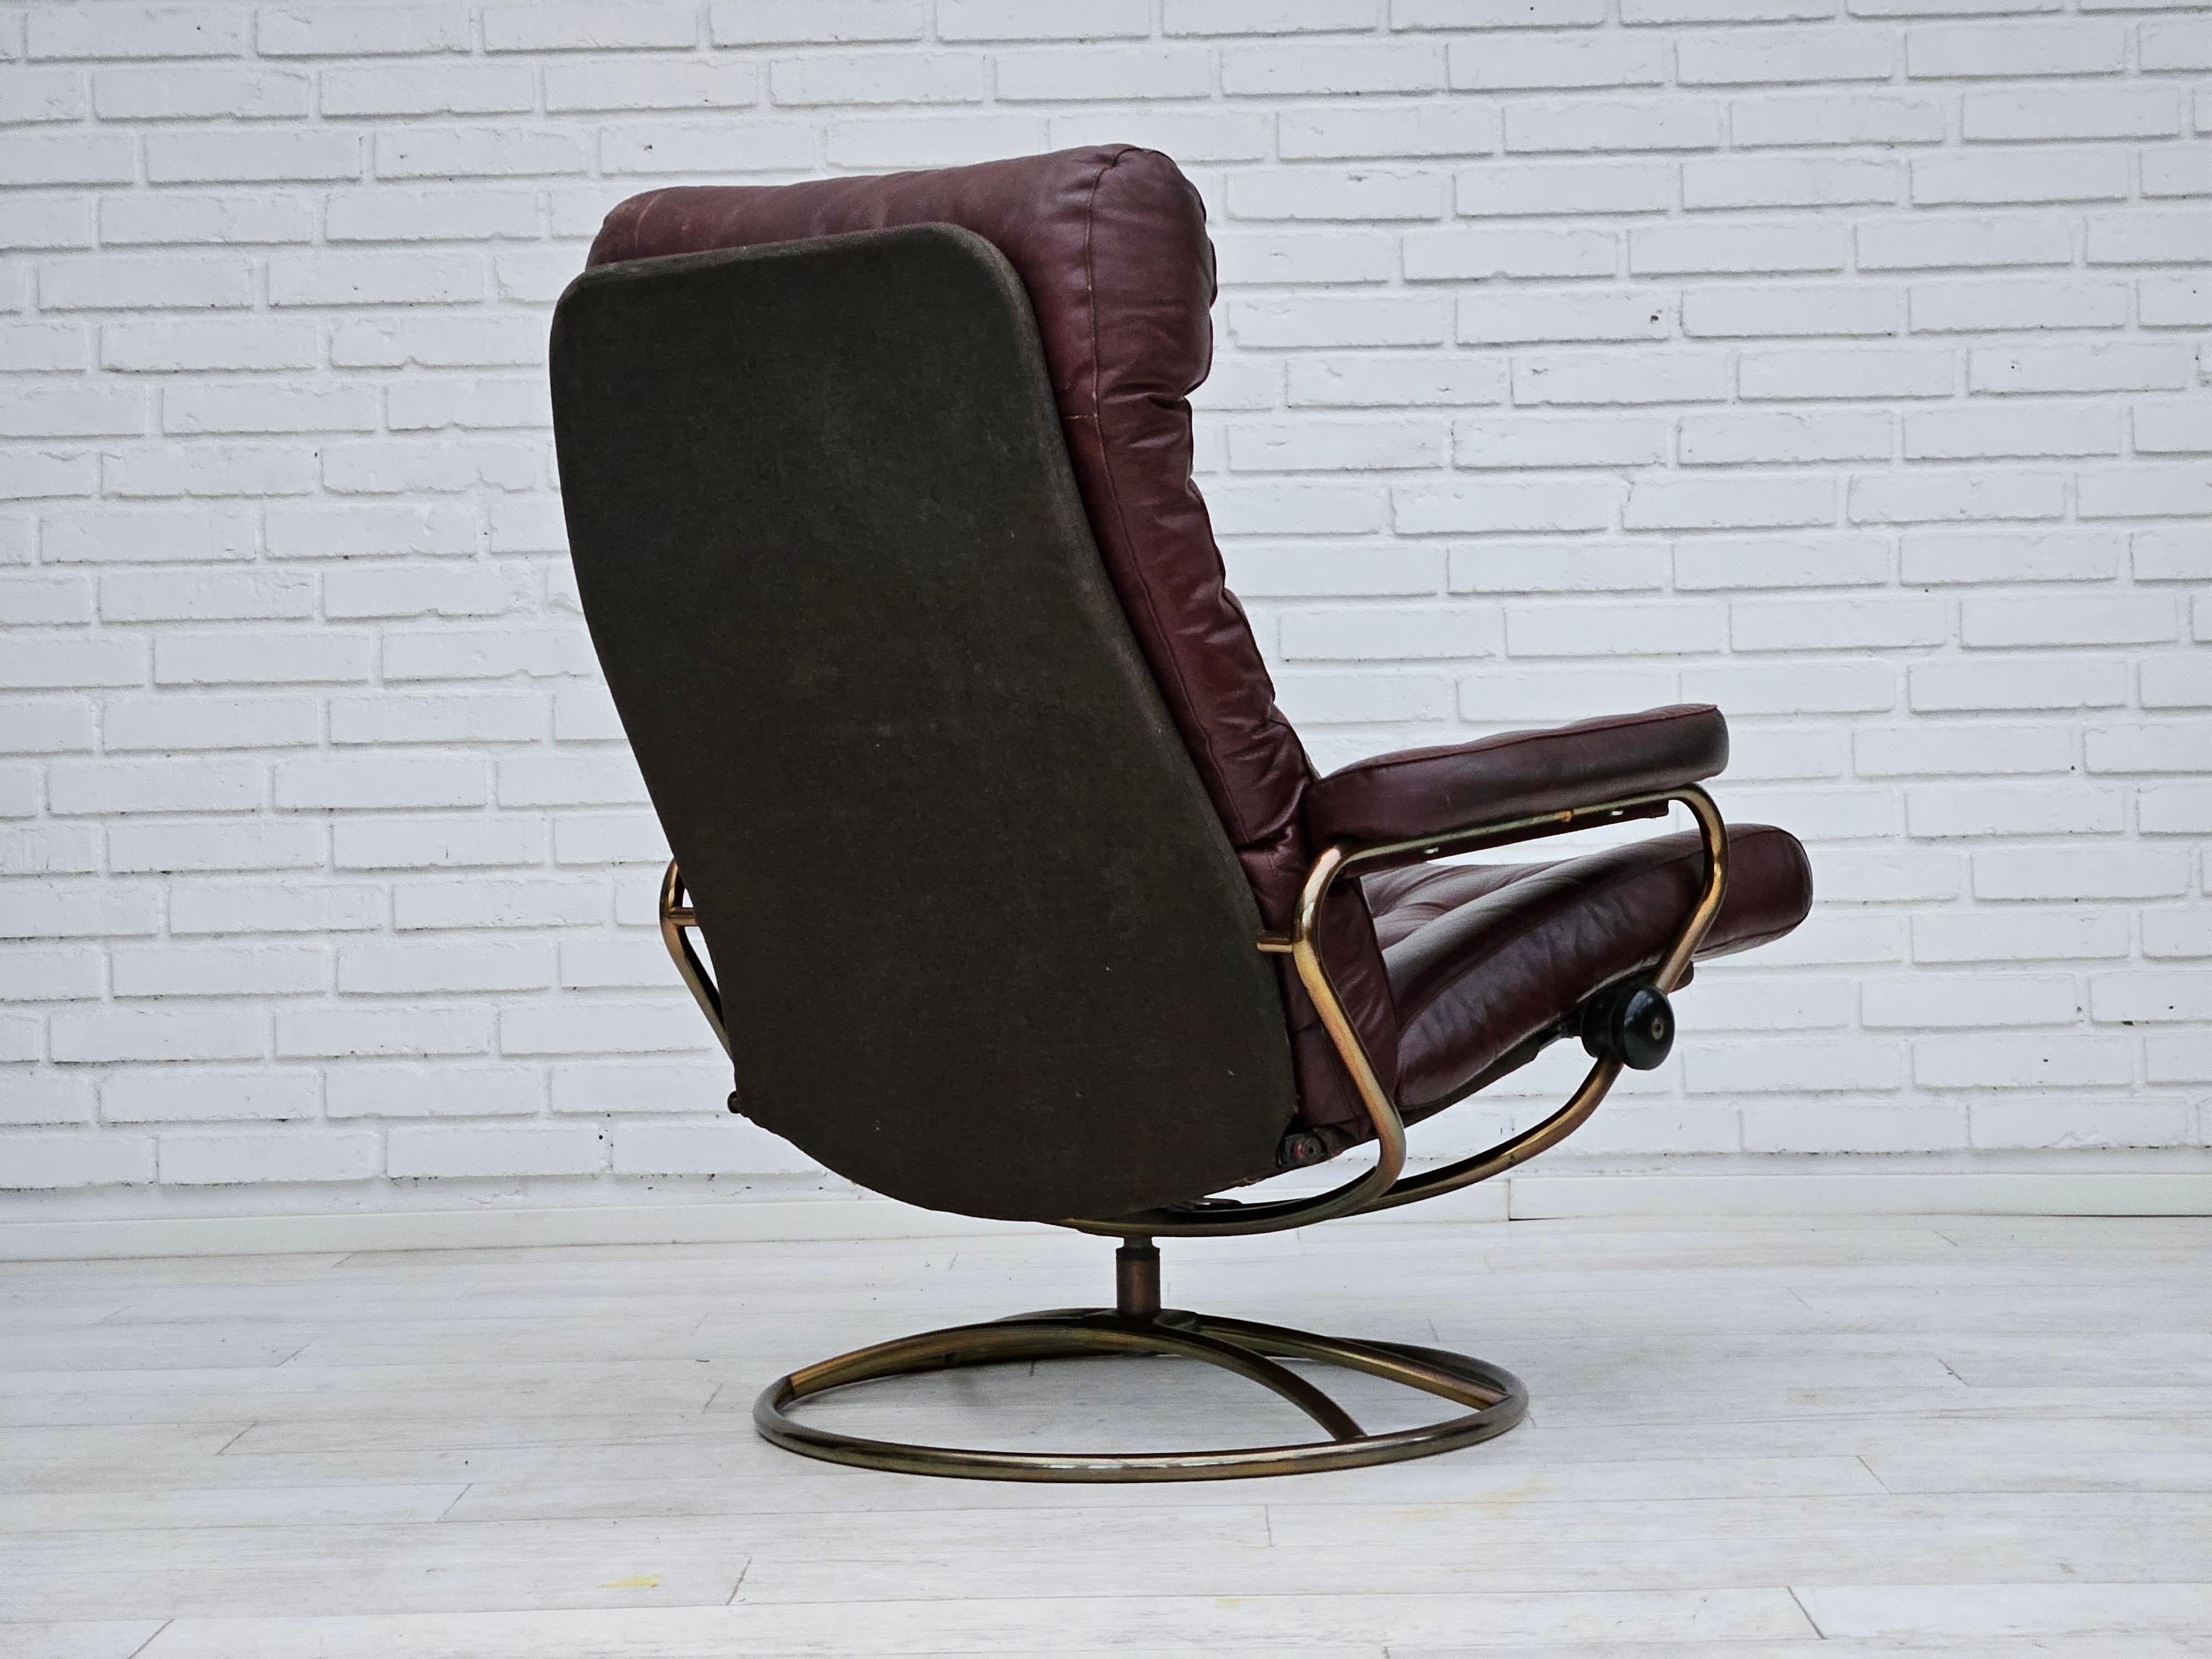 1970s, Norwegian relax swivel chair by Stressless, original very good condition. 6